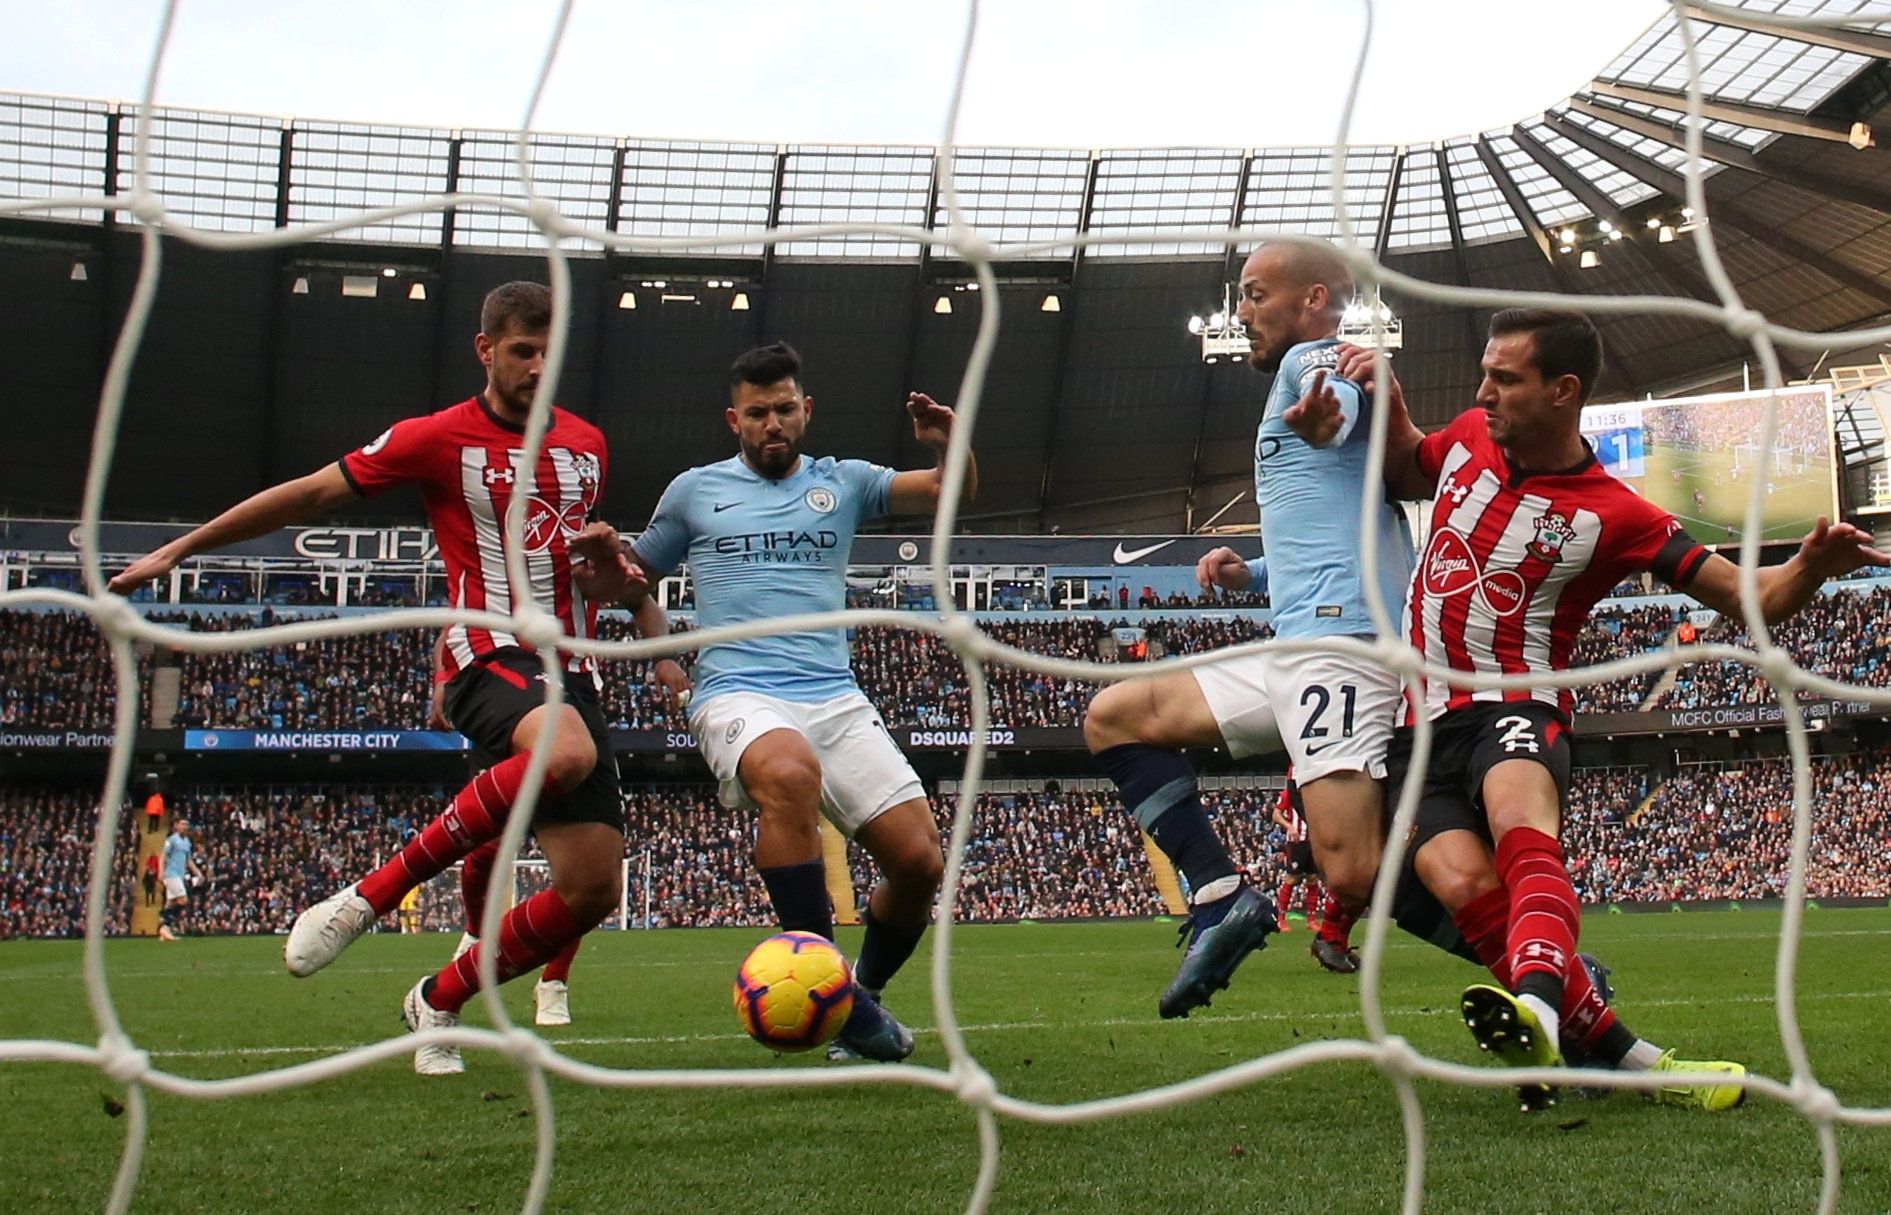 Soccer Football - Premier League - Manchester City v Southampton - Etihad Stadium, Manchester, Britain - November 4, 2018  Manchester City's Sergio Aguero scores their second goal   Action Images via Reuters/Jason Cairnduff  EDITORIAL USE ONLY. No use with unauthorized audio, video, data, fixture lists, club/league logos or "live" services. Online in-match use limited to 75 images, no video emulation. No use in betting, games or single club/league/player publications.  Please contact your accoun